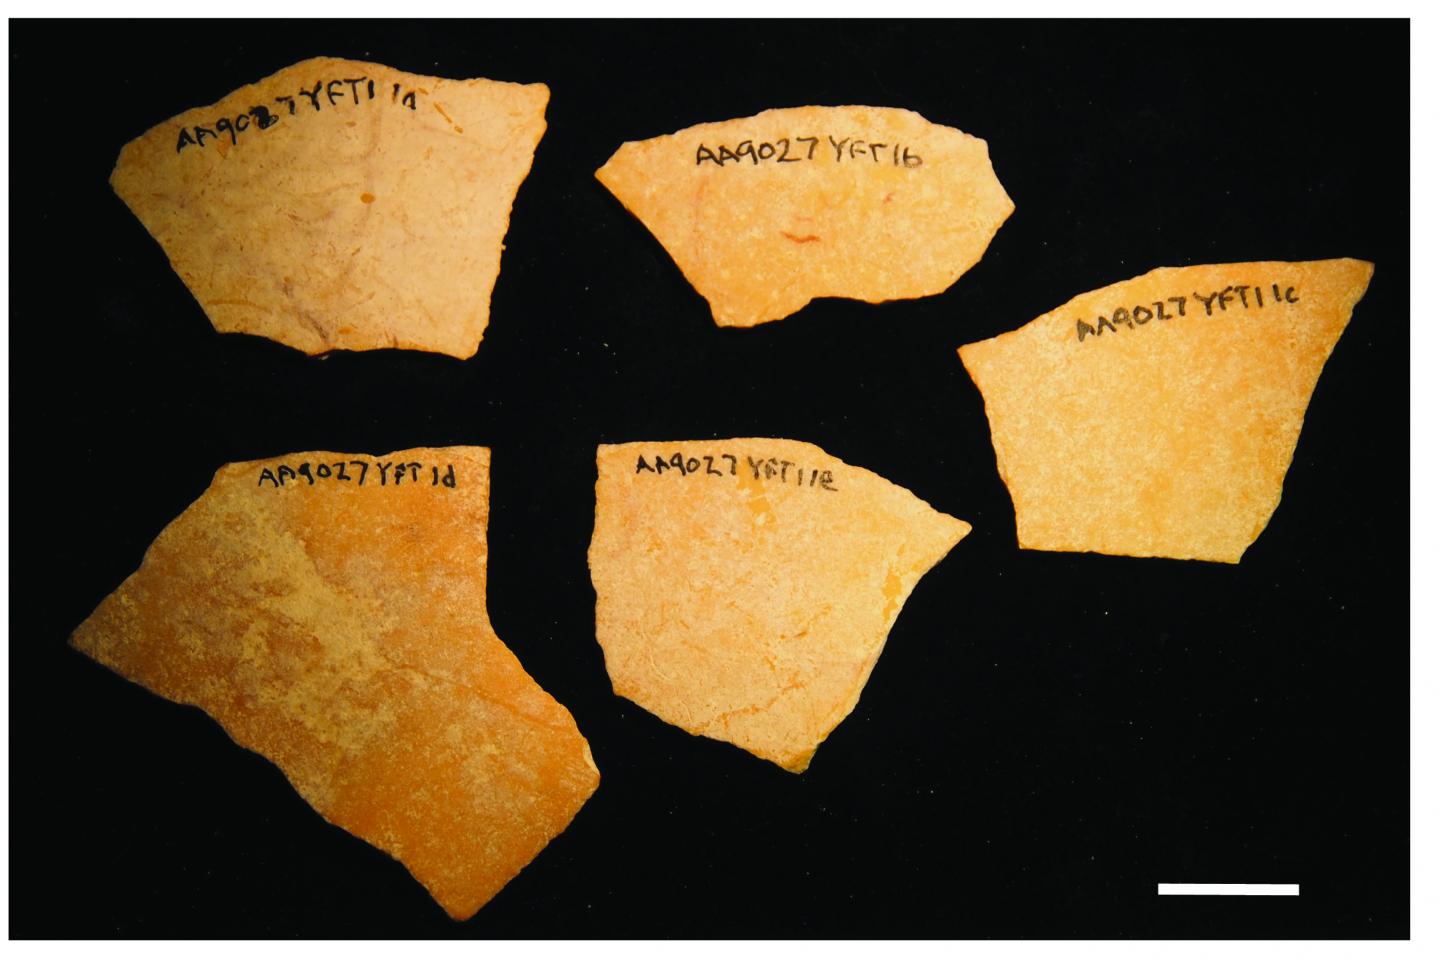 120,000-year-old ostrich eggshells from South African midden